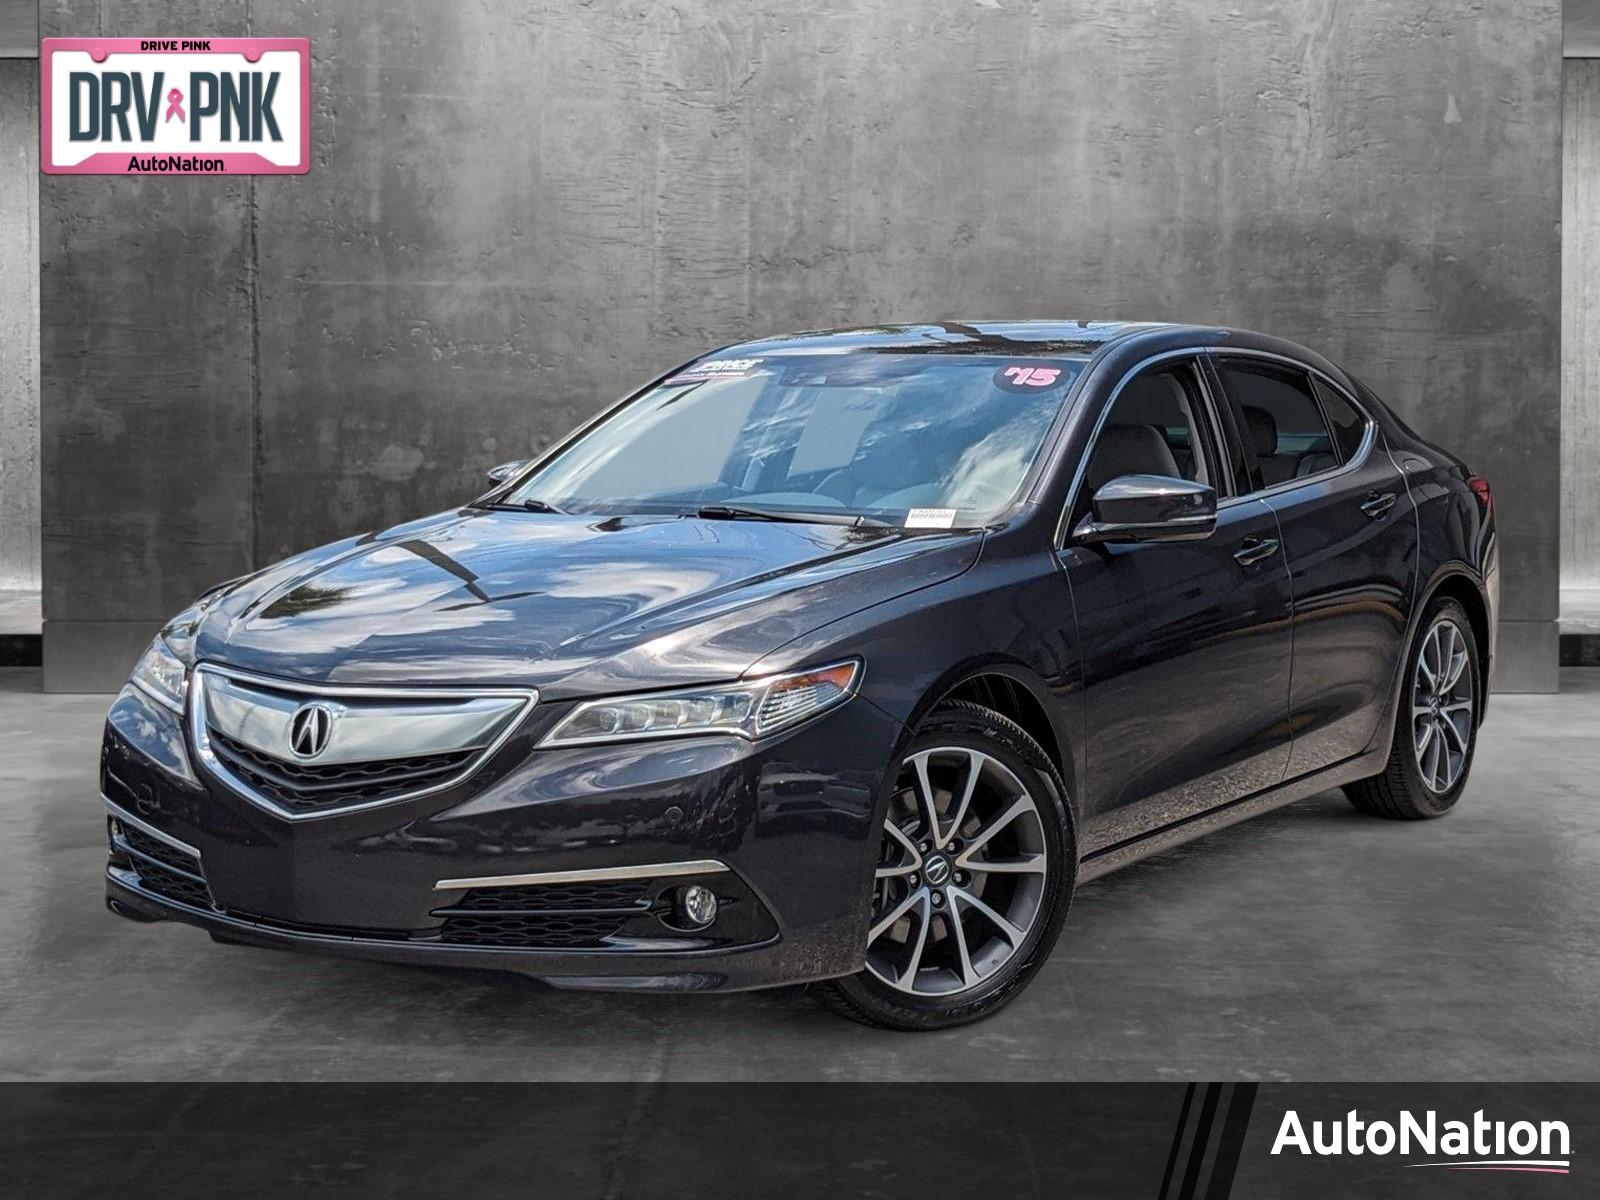 2015 Acura TLX Vehicle Photo in Tampa, FL 33614